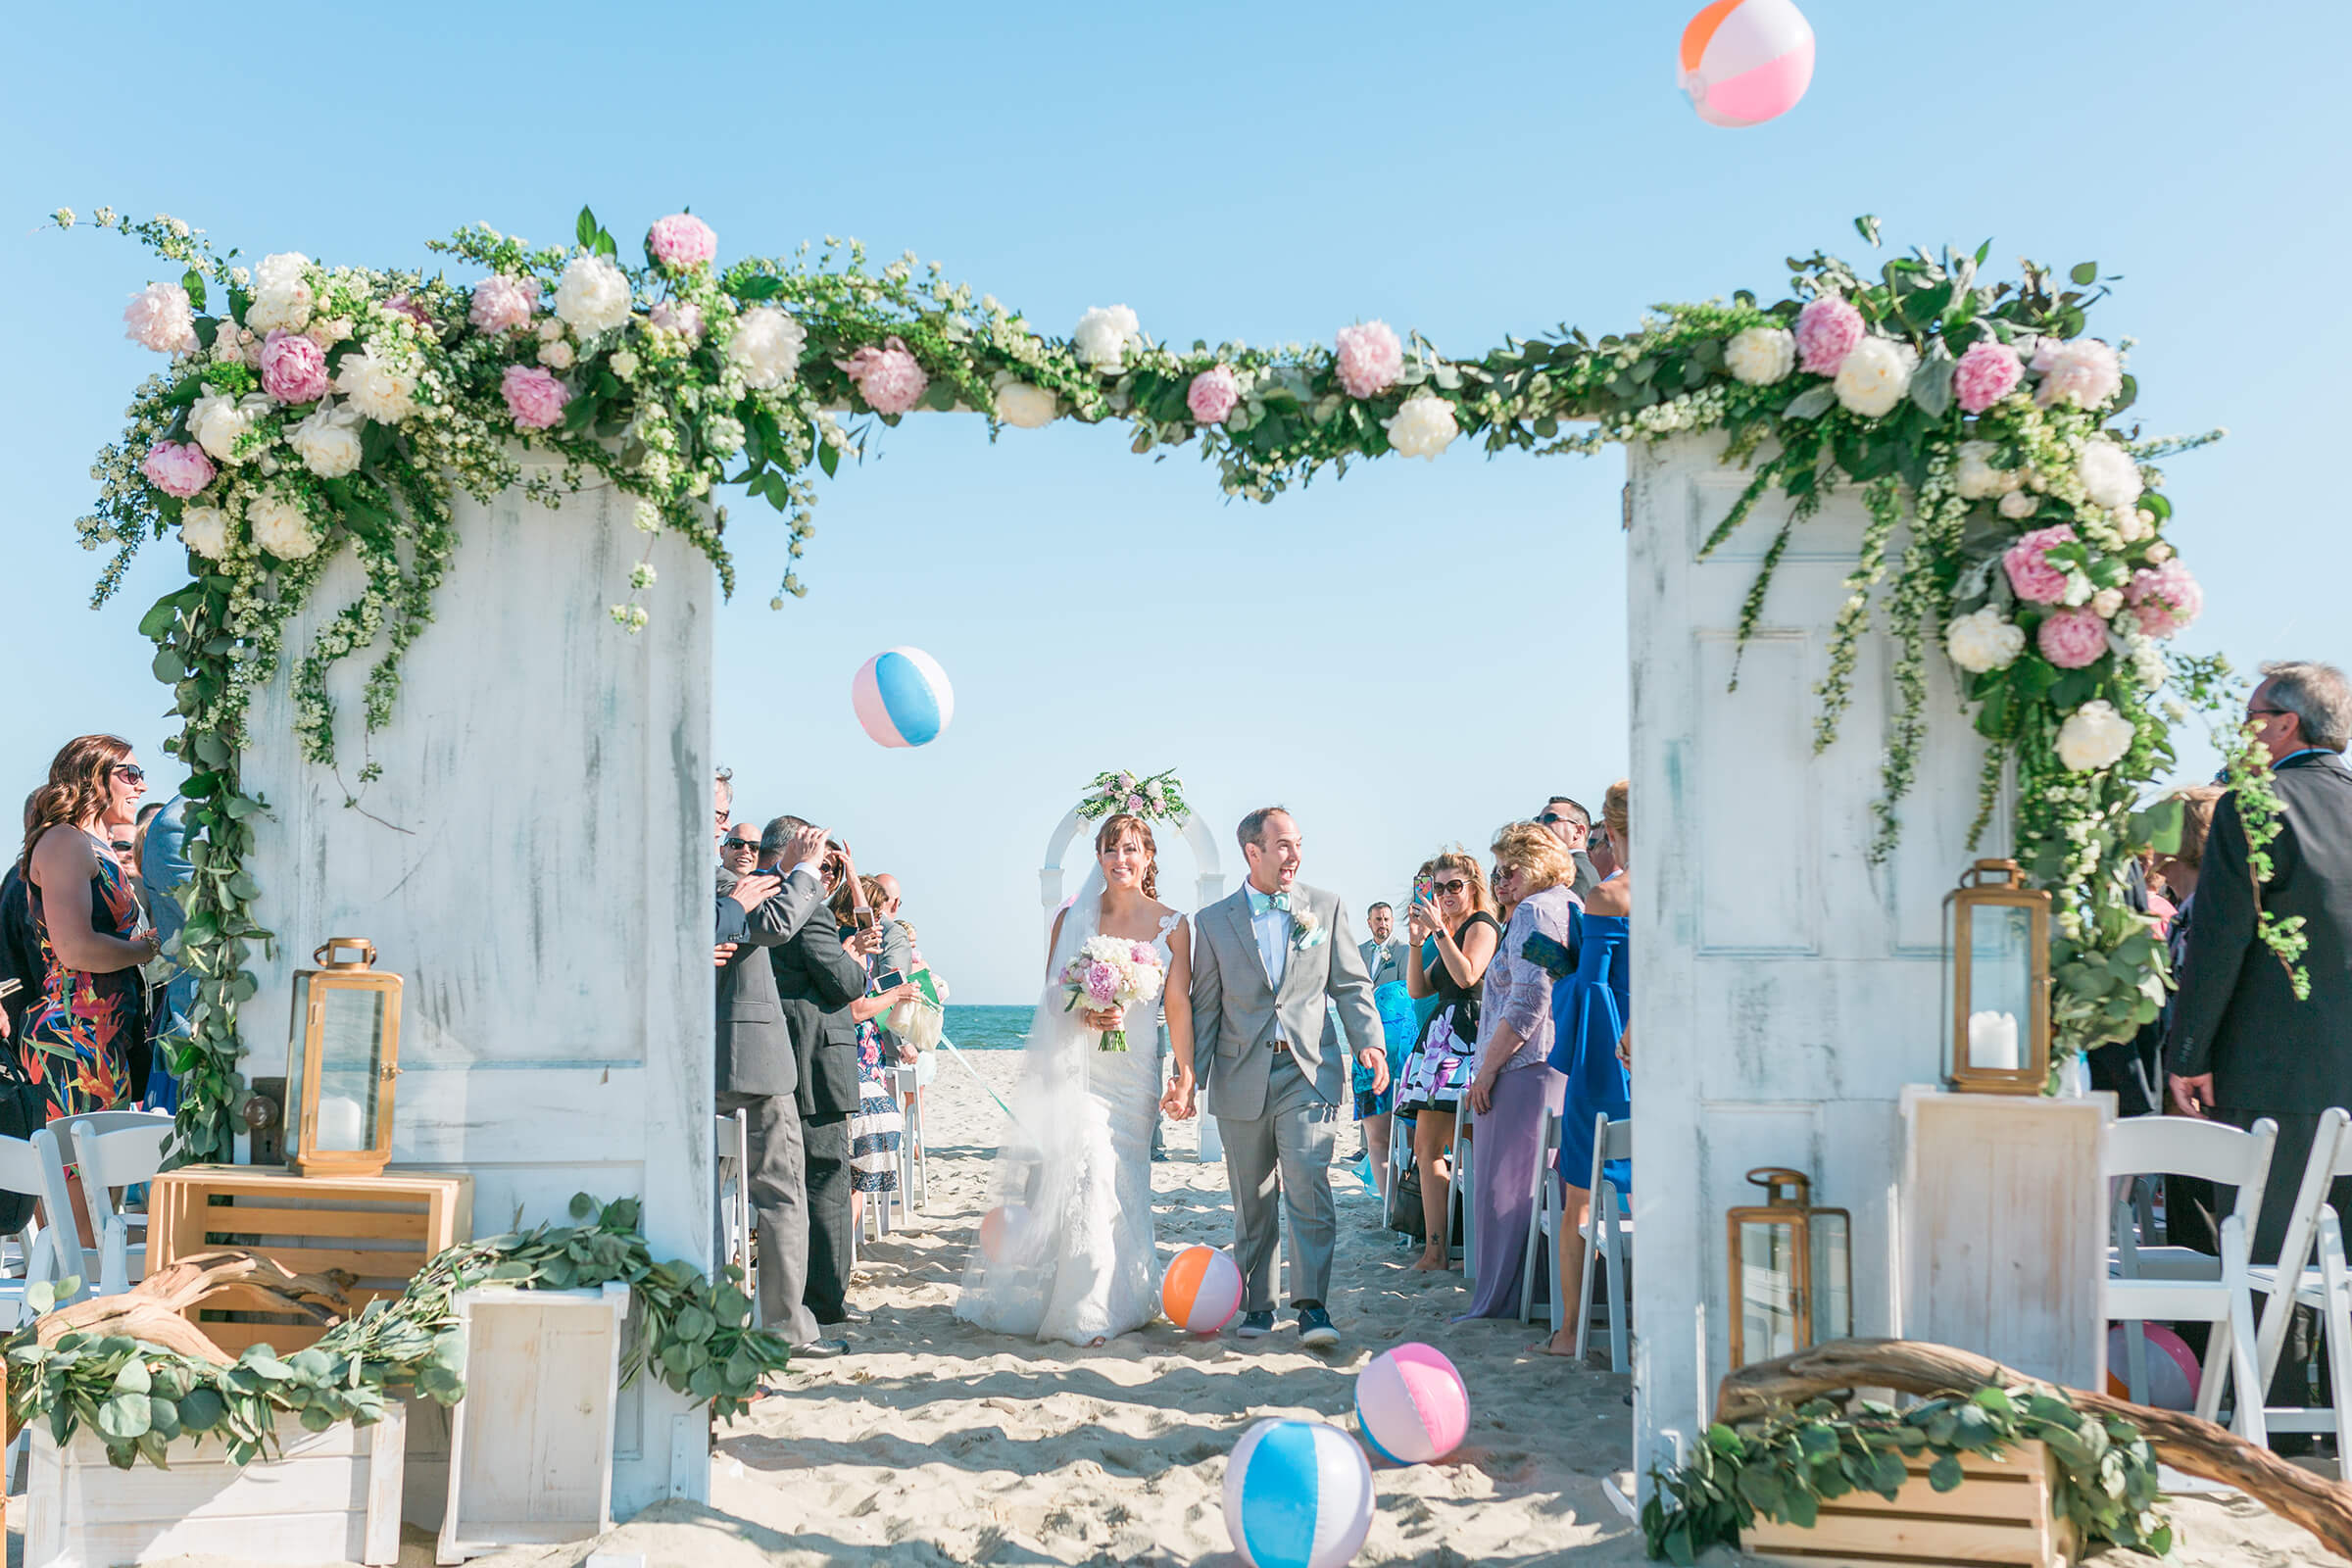 Why Linen Pants And Shirts Best For The Beach Wedding?